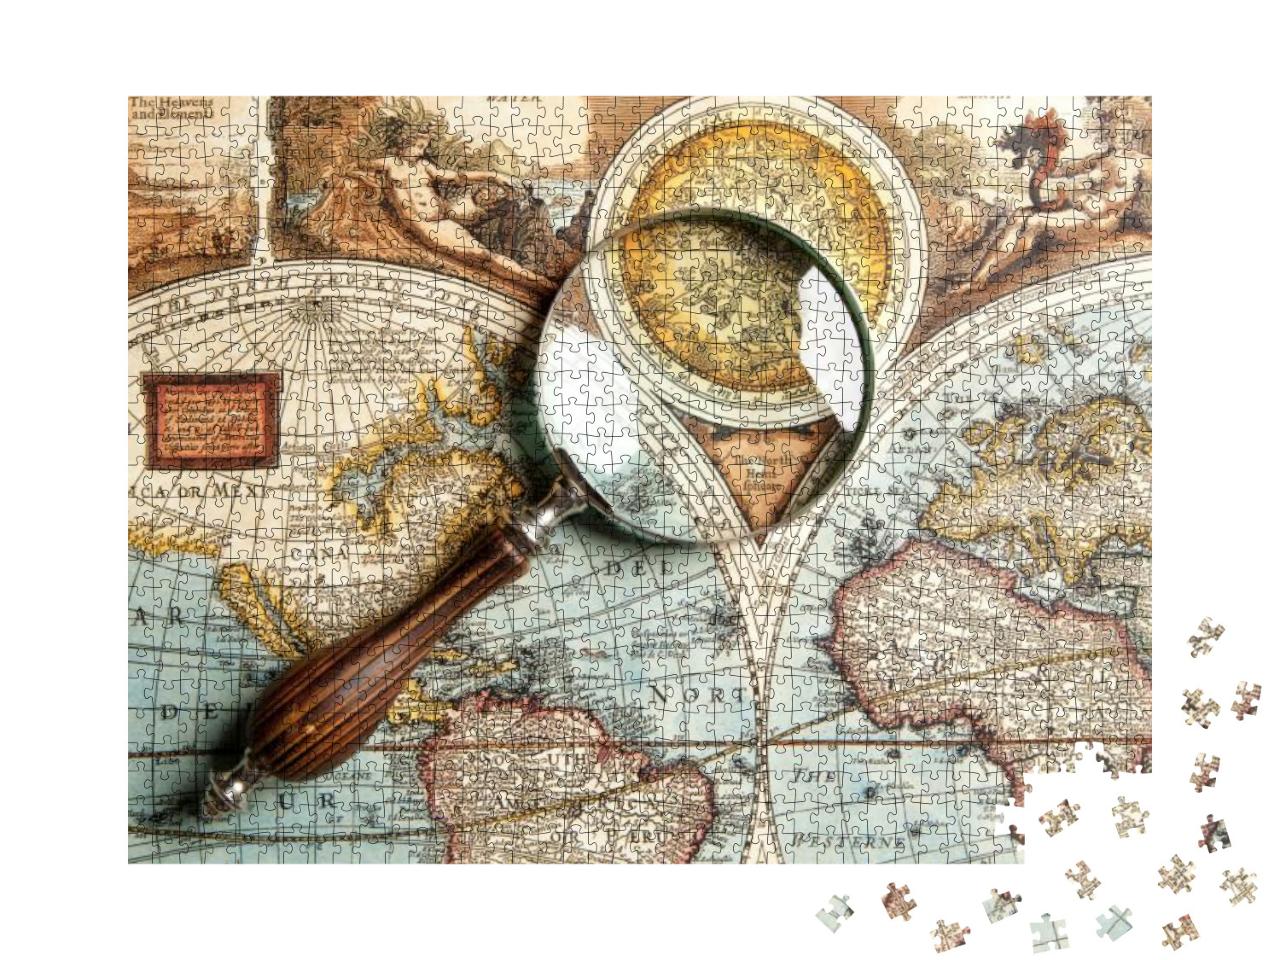 Magnifying Glass & Ancient Old Map... Jigsaw Puzzle with 1000 pieces